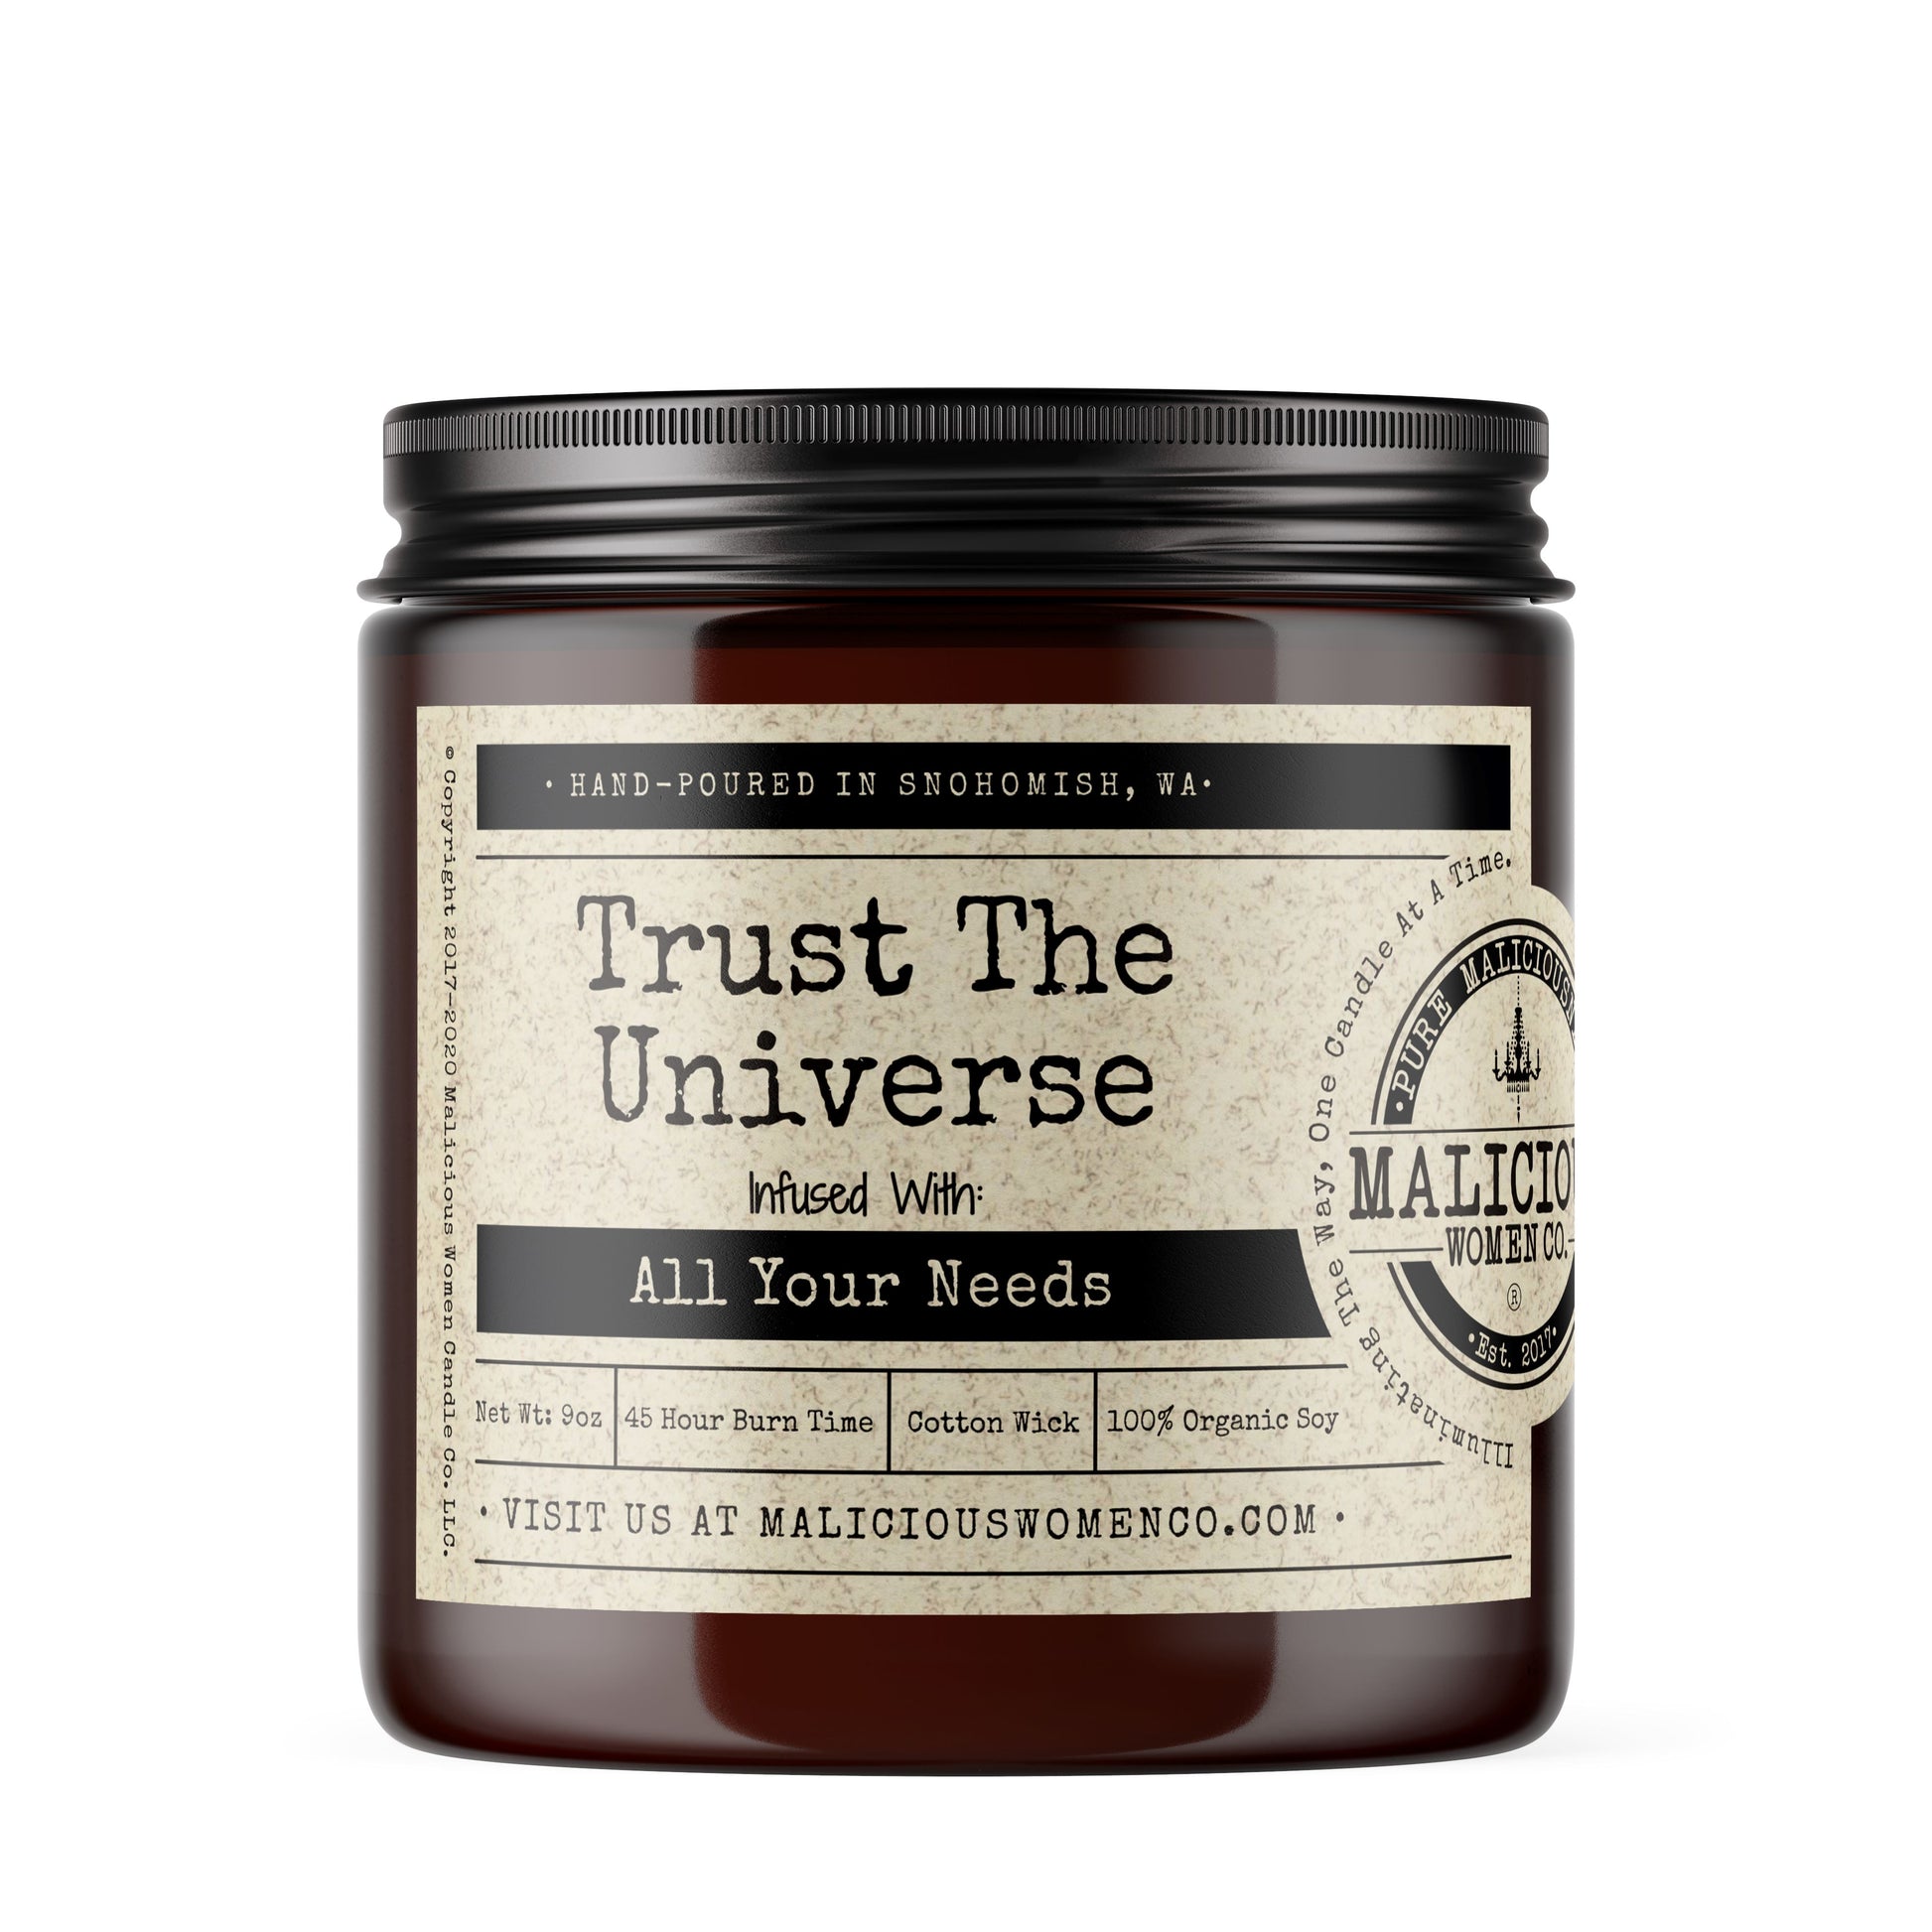 Trust The Universe - Infused With "All Your Needs" Scent: Citrus & Sage * WitchCandles Malicious Women Candle Co. 